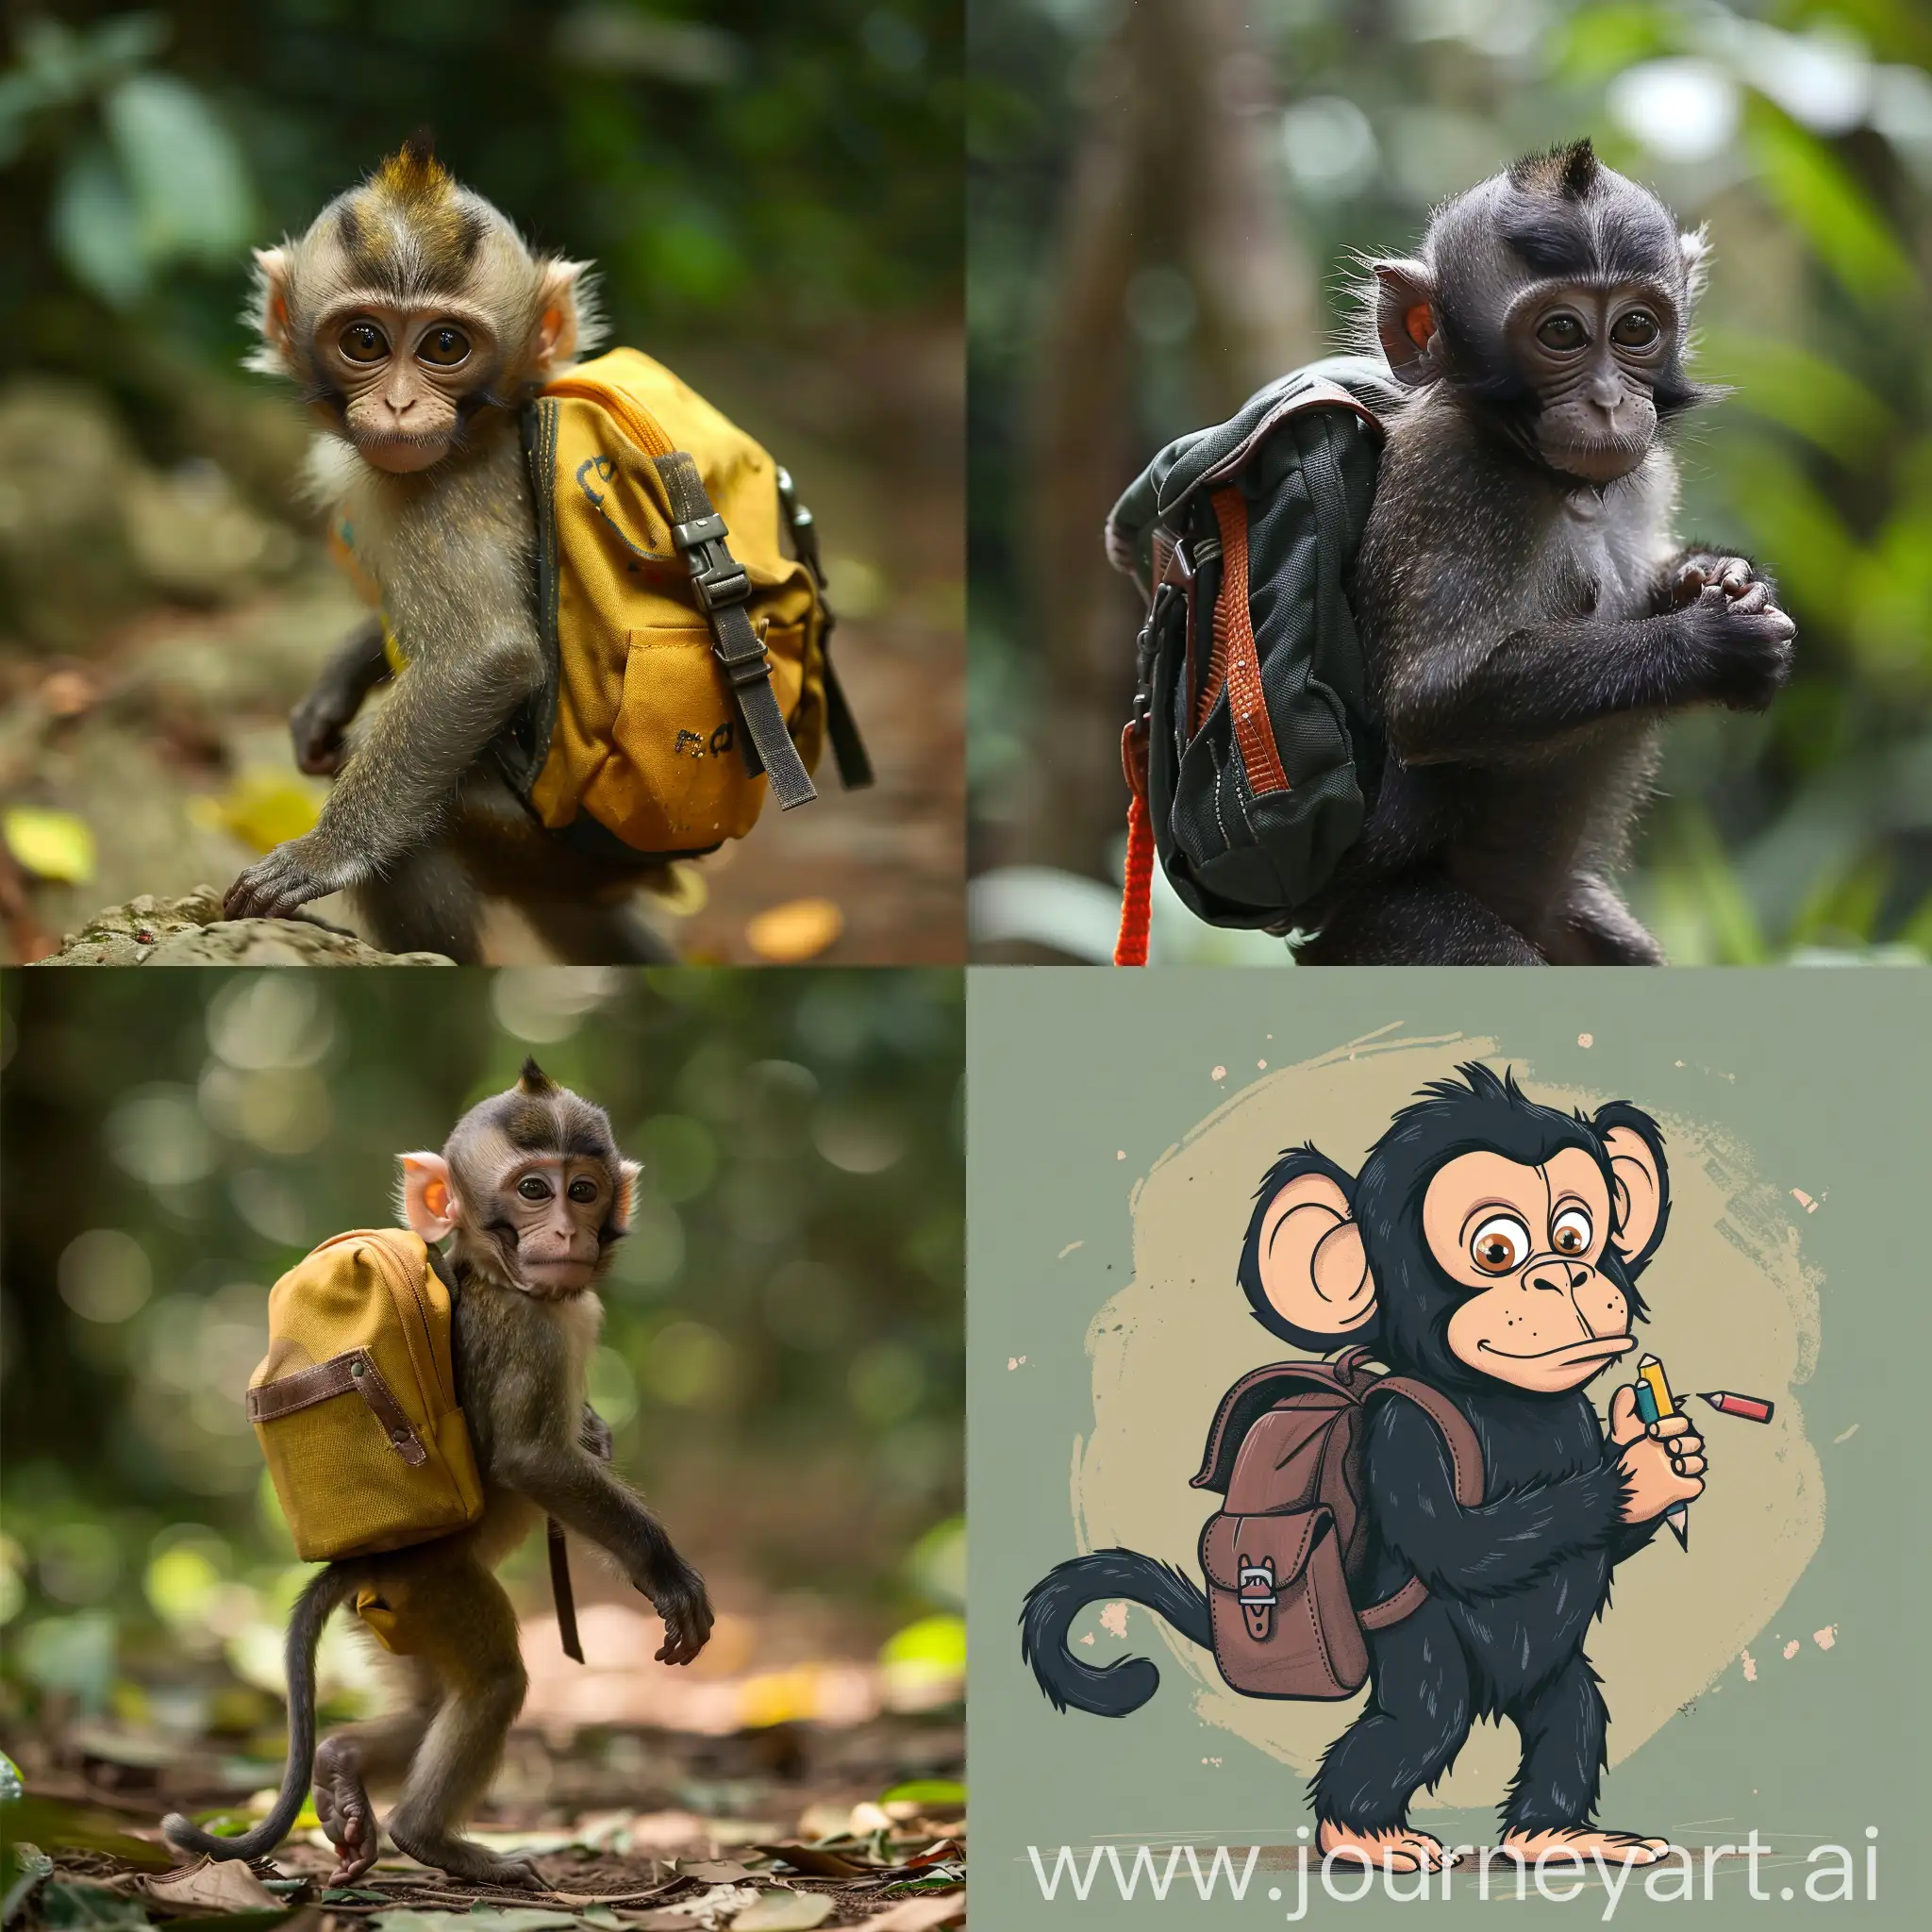 Adorable-Monkey-Attends-School-in-a-Vibrant-Classroom-Setting